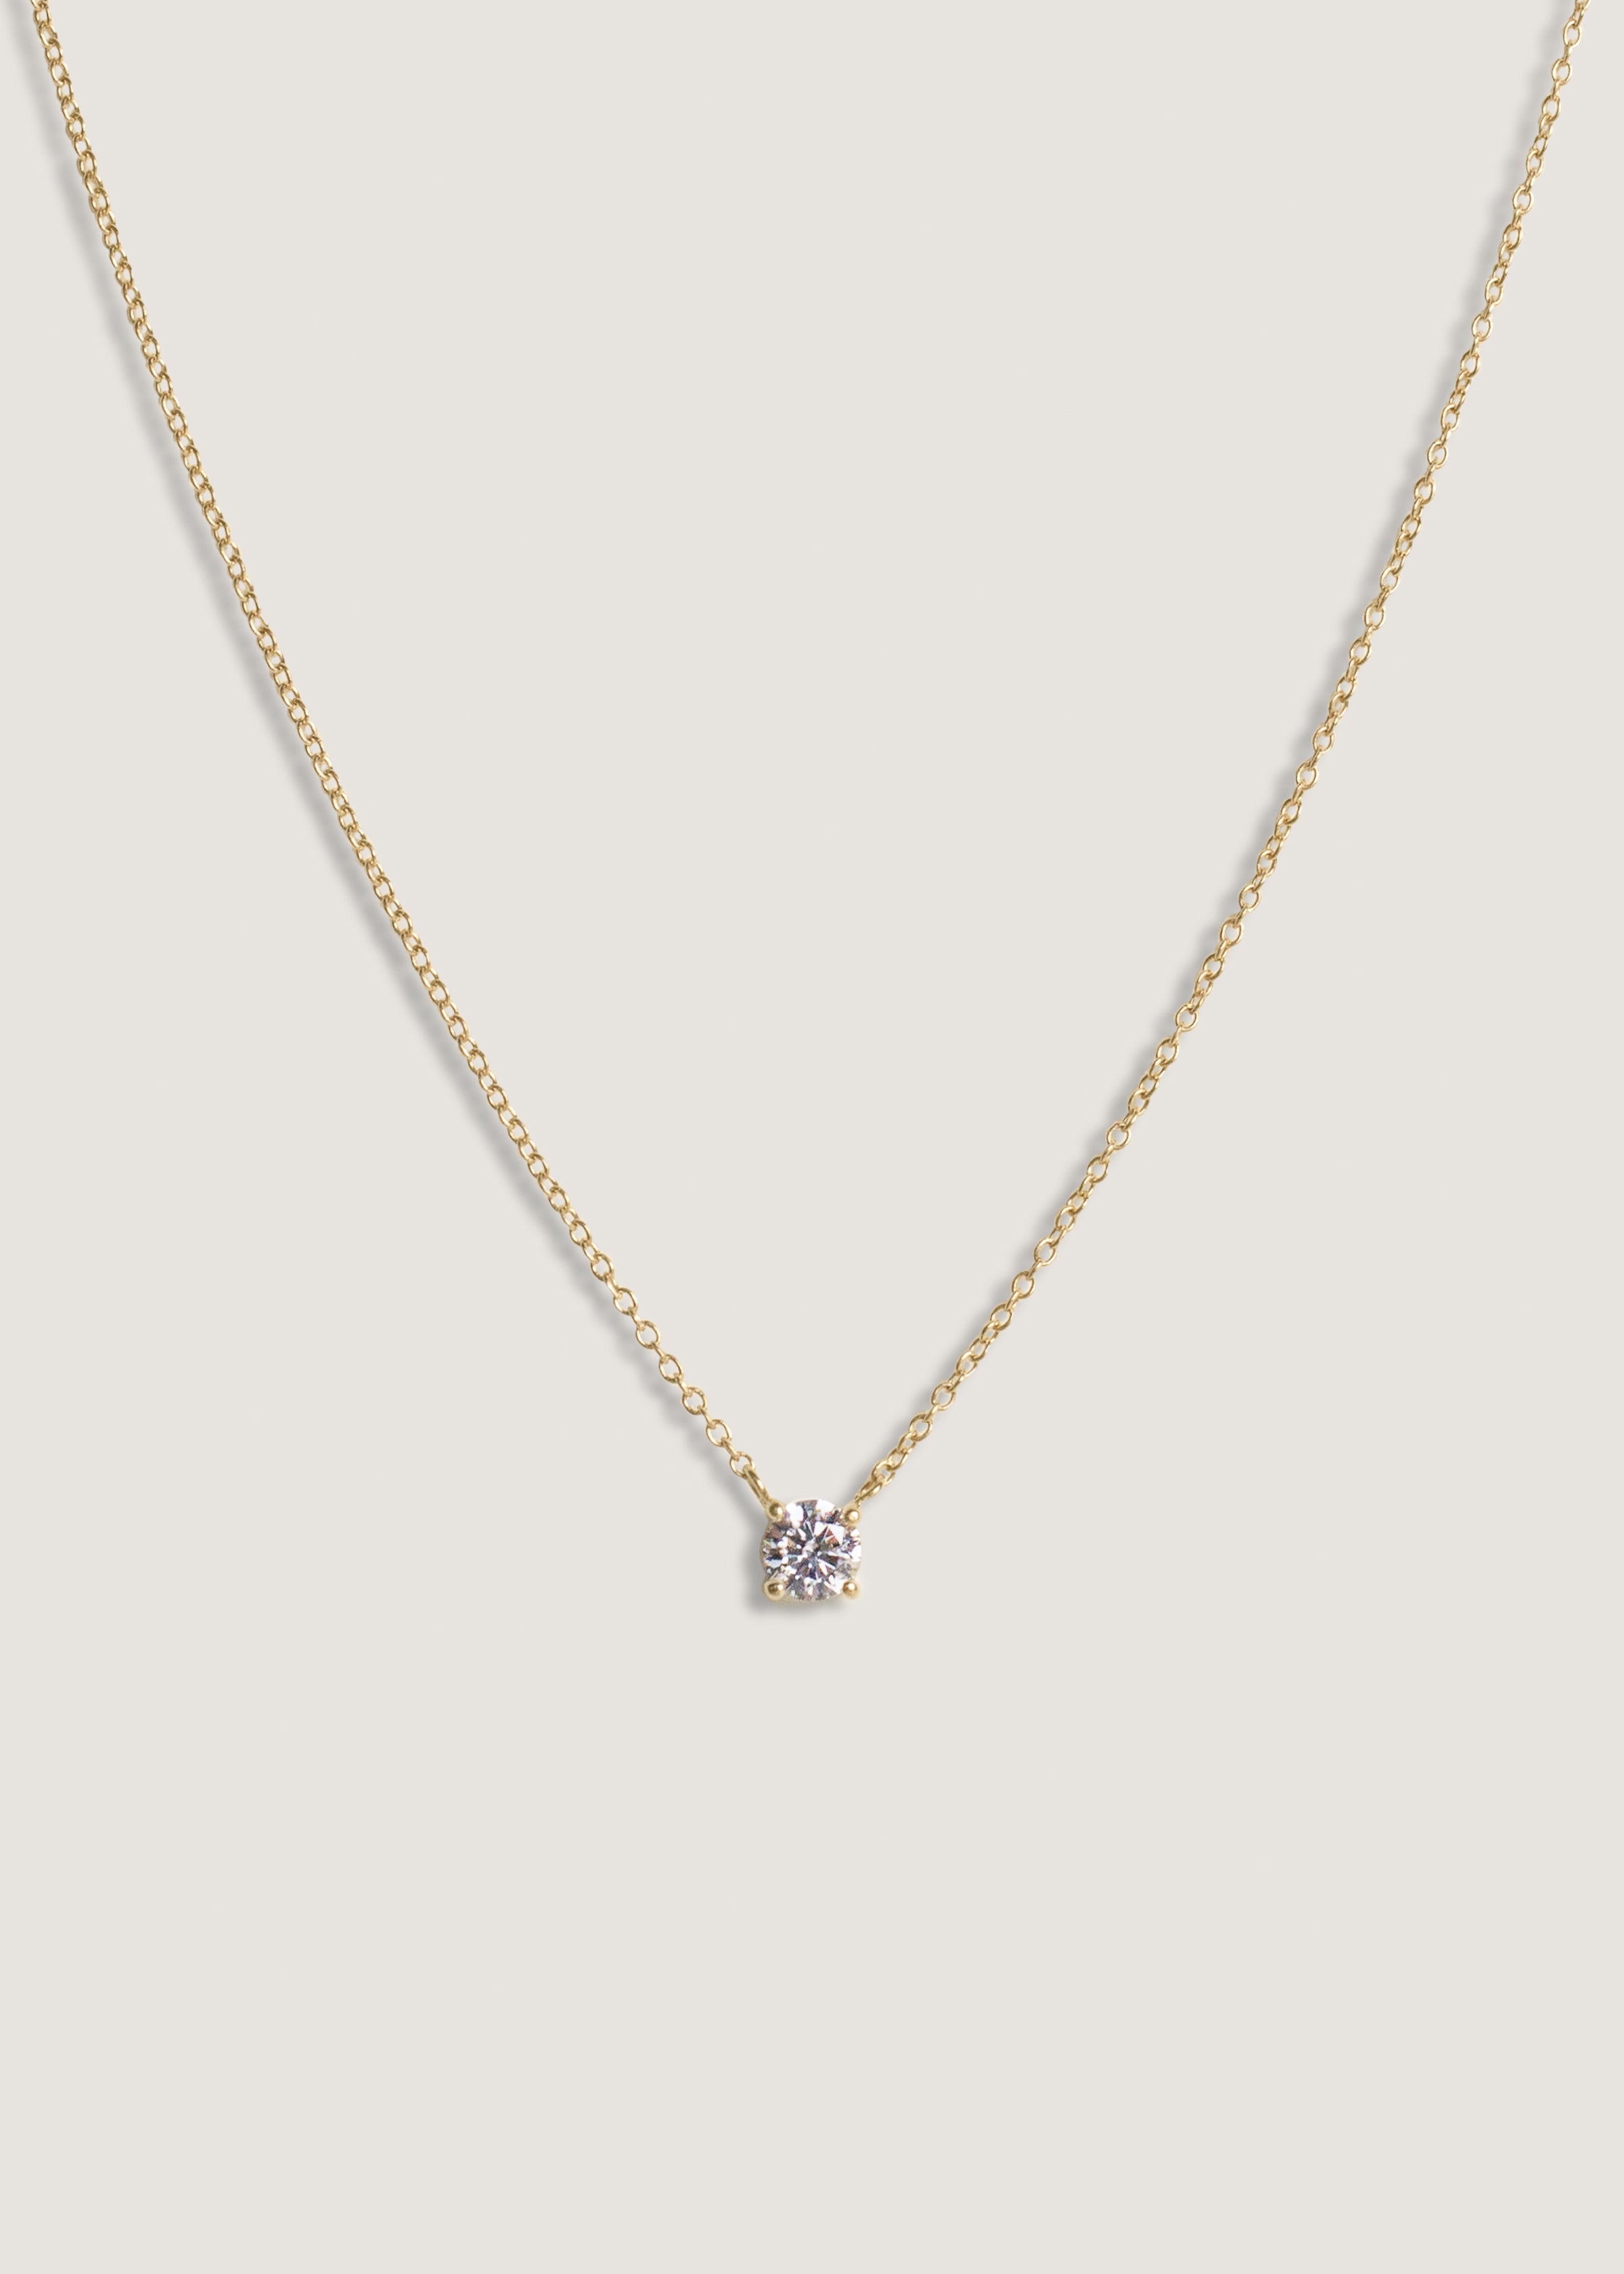 Solitaire Floating Round Diamond Necklace